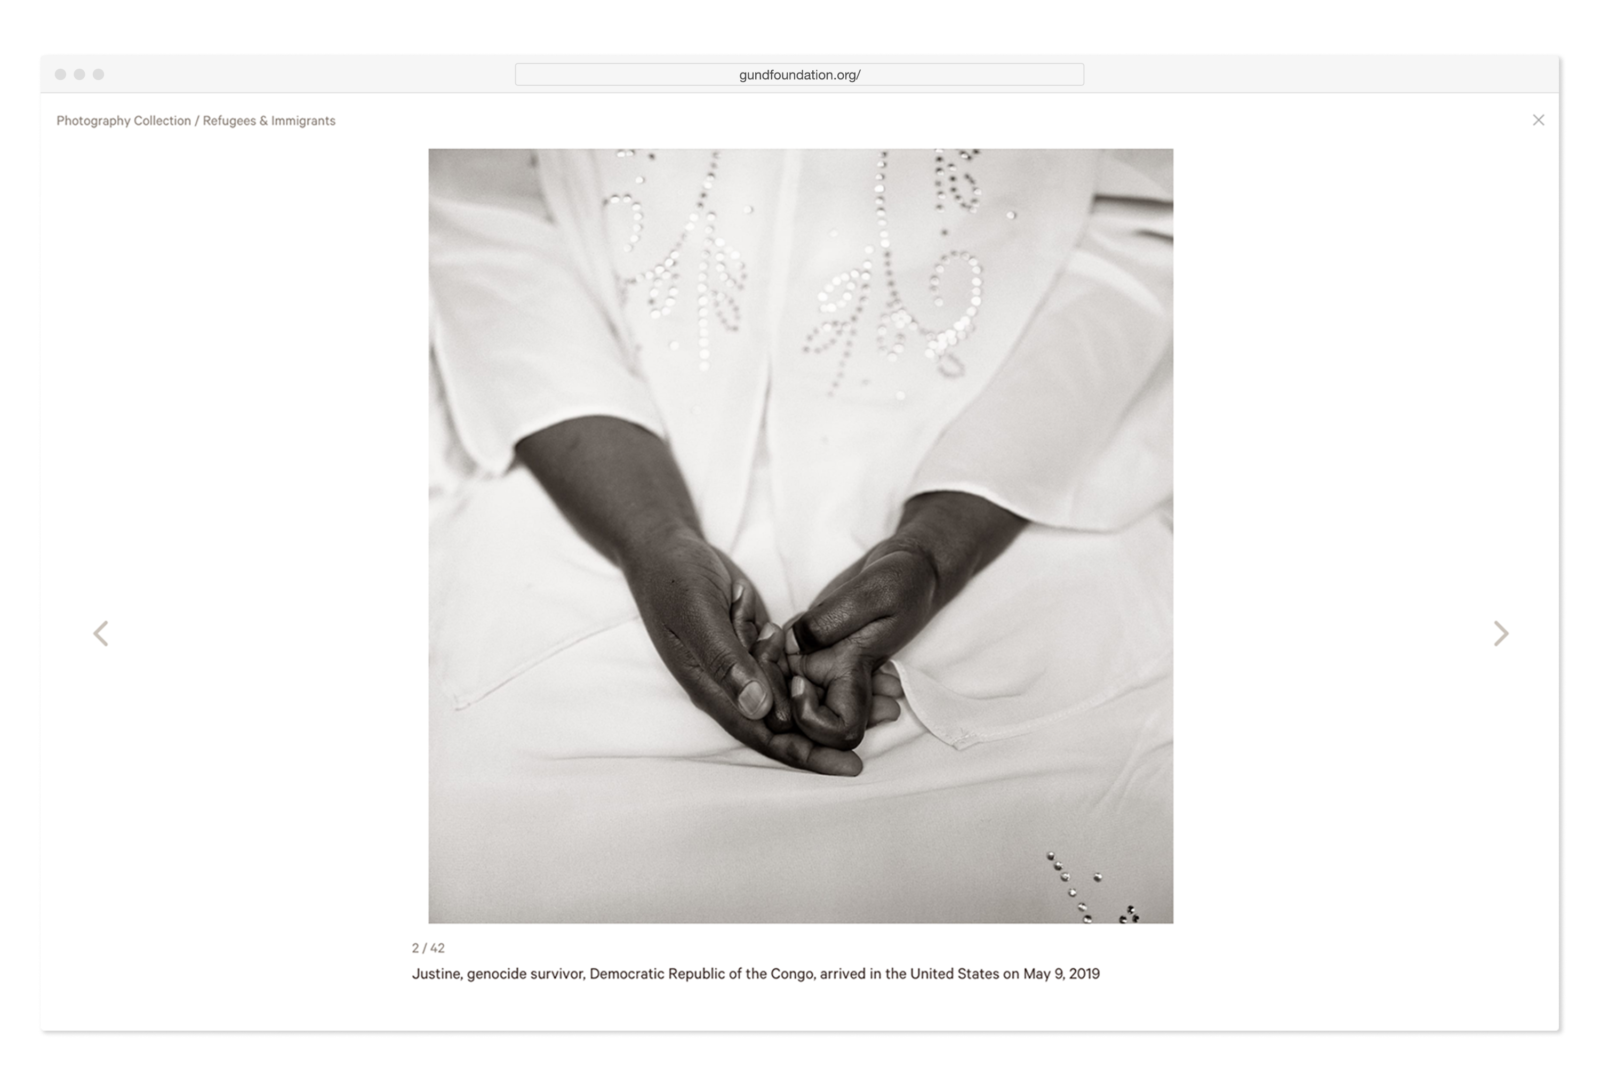 Web browser view of The George Gund Foundation annual web design, featuring hands photographed by Fazel Sheikh